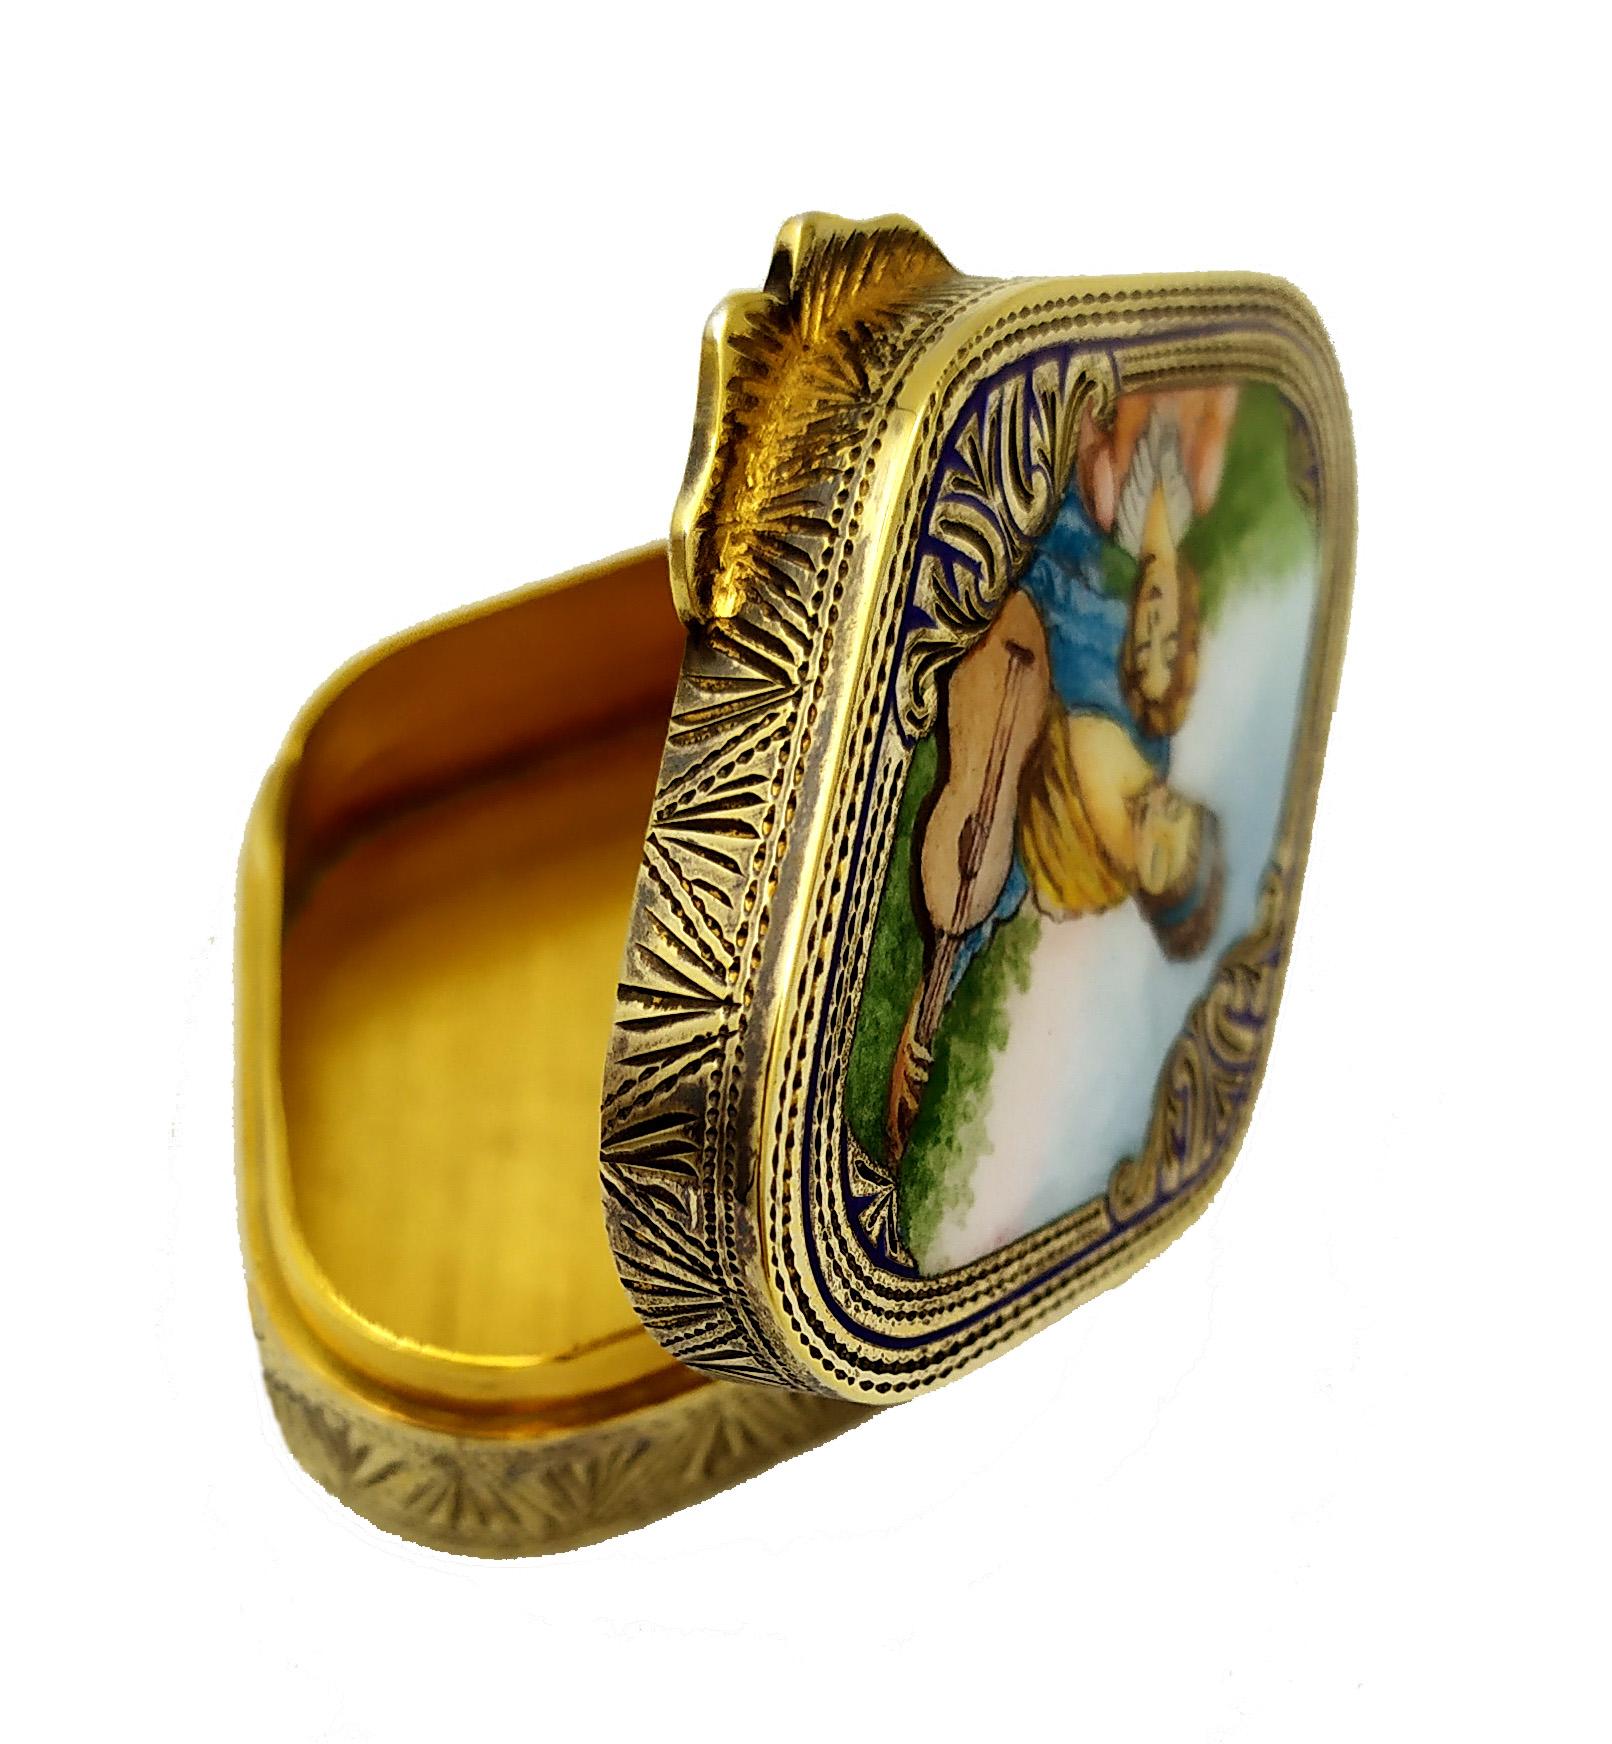 Italian Pill Box Sterling Silver Hand Painted Miniature Enamel on Guillochè Salimbeni For Sale